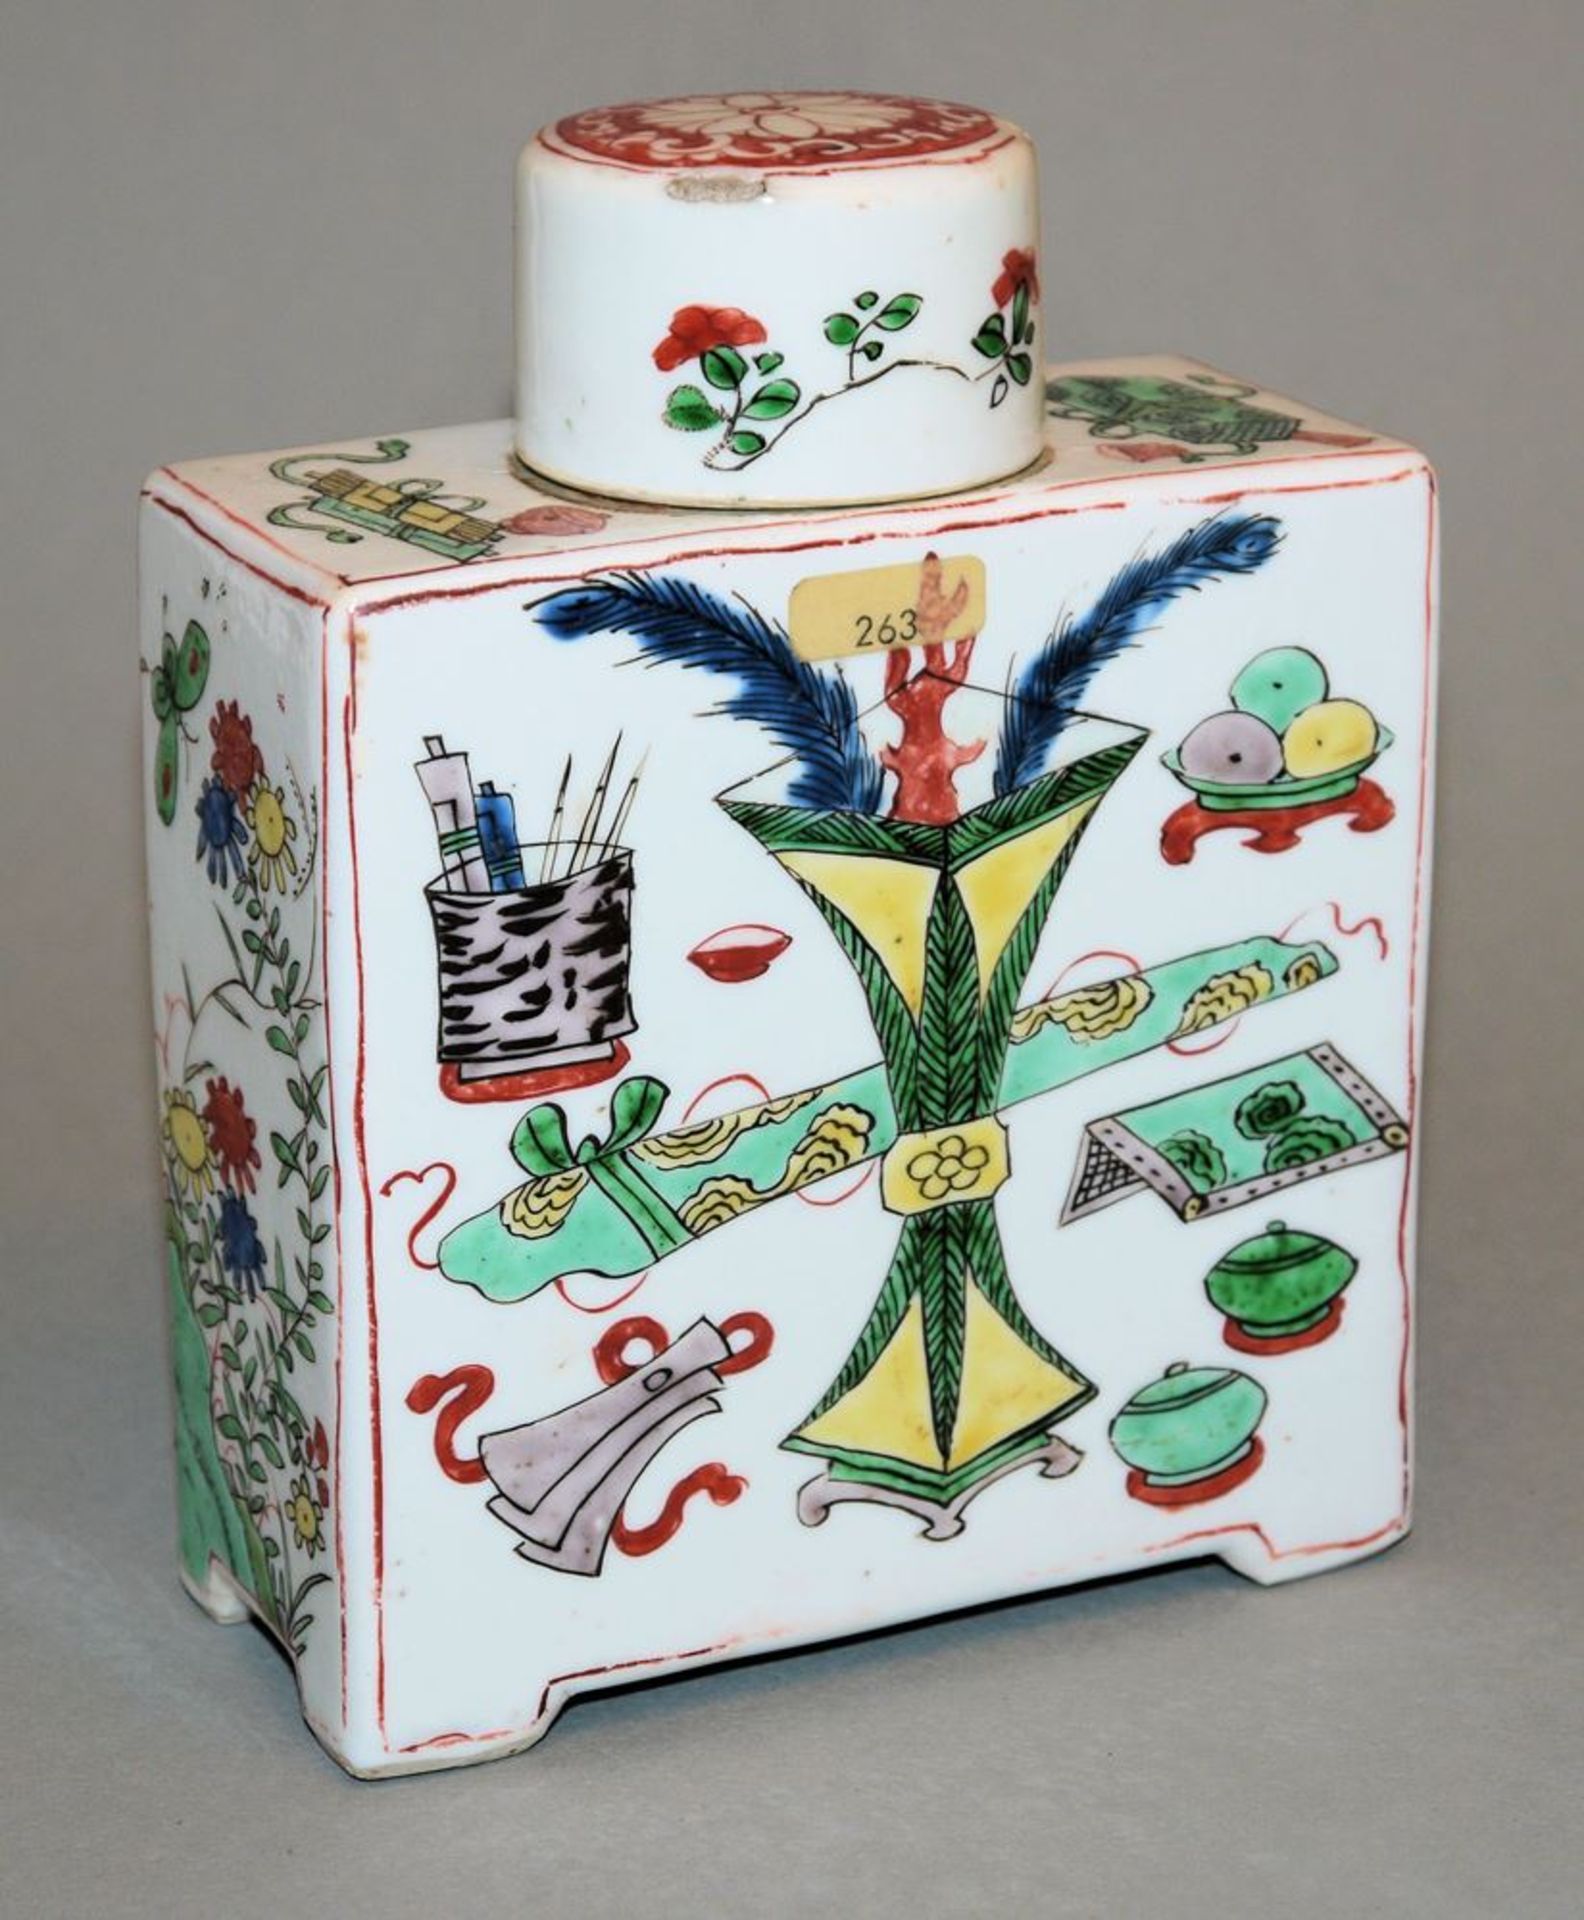 Wucai tea caddy with antiquity decoration, Qing period, China 18th century